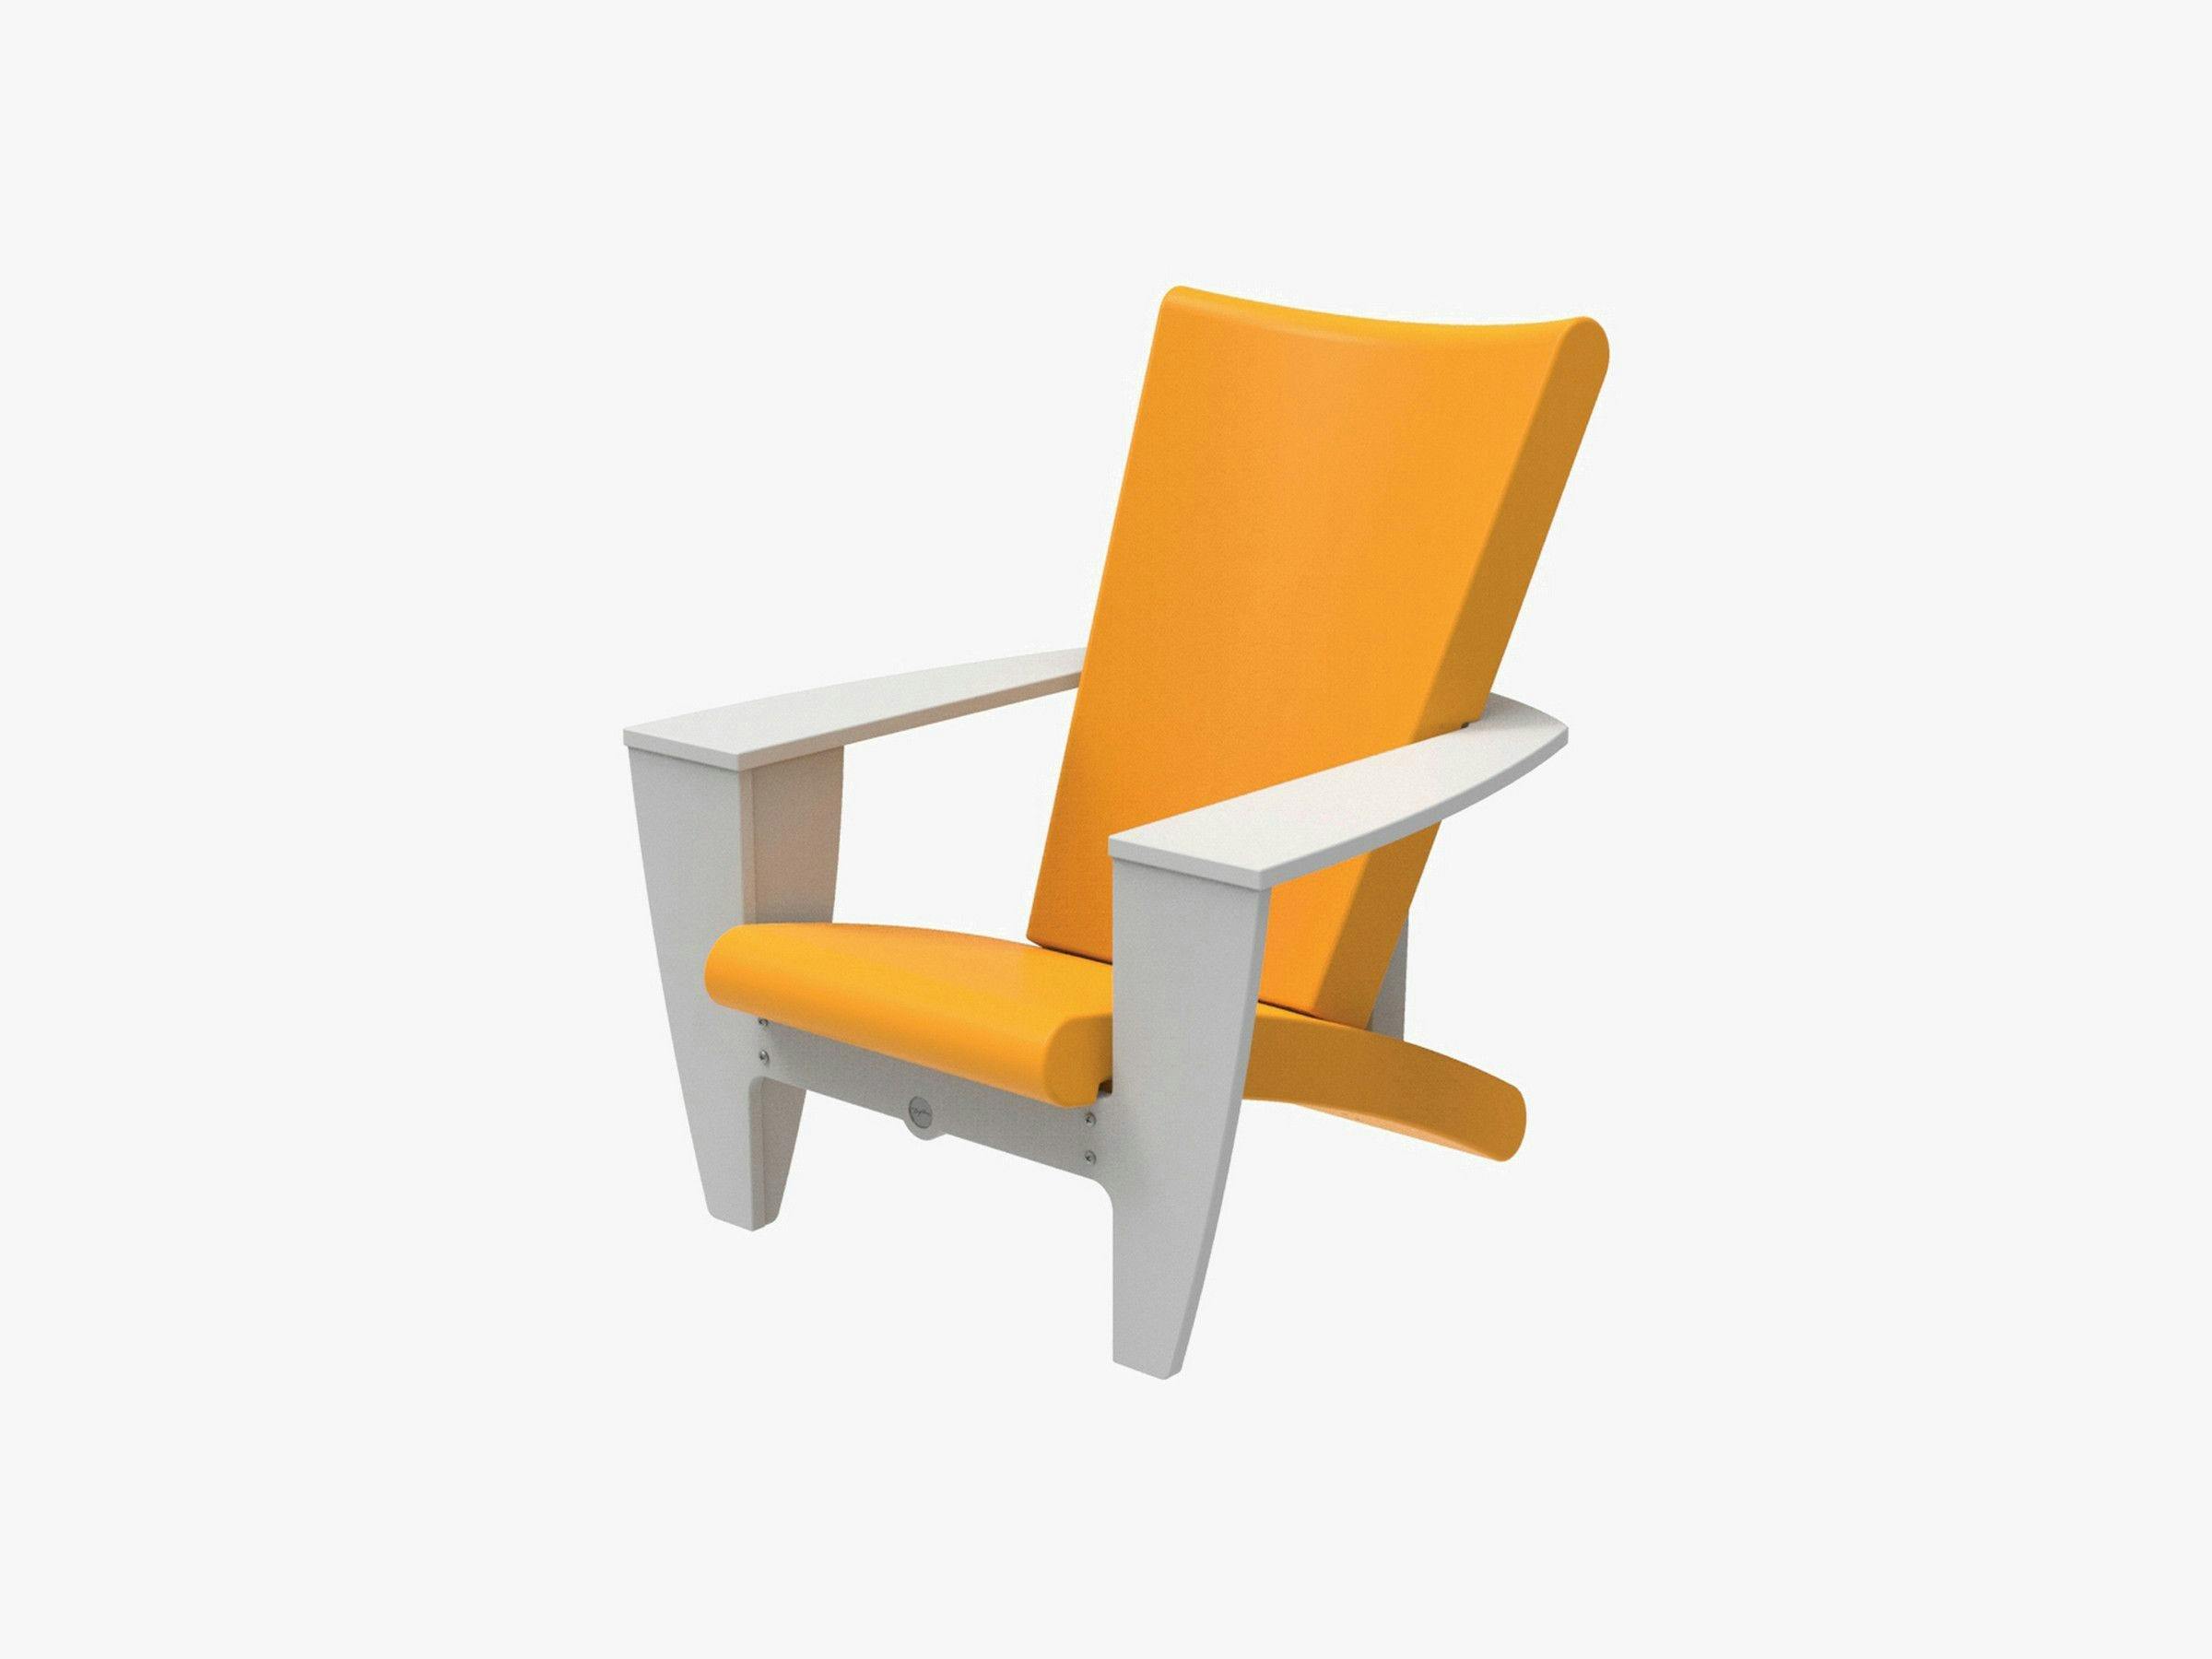 COZI Lounge Chair with white armrests/legs